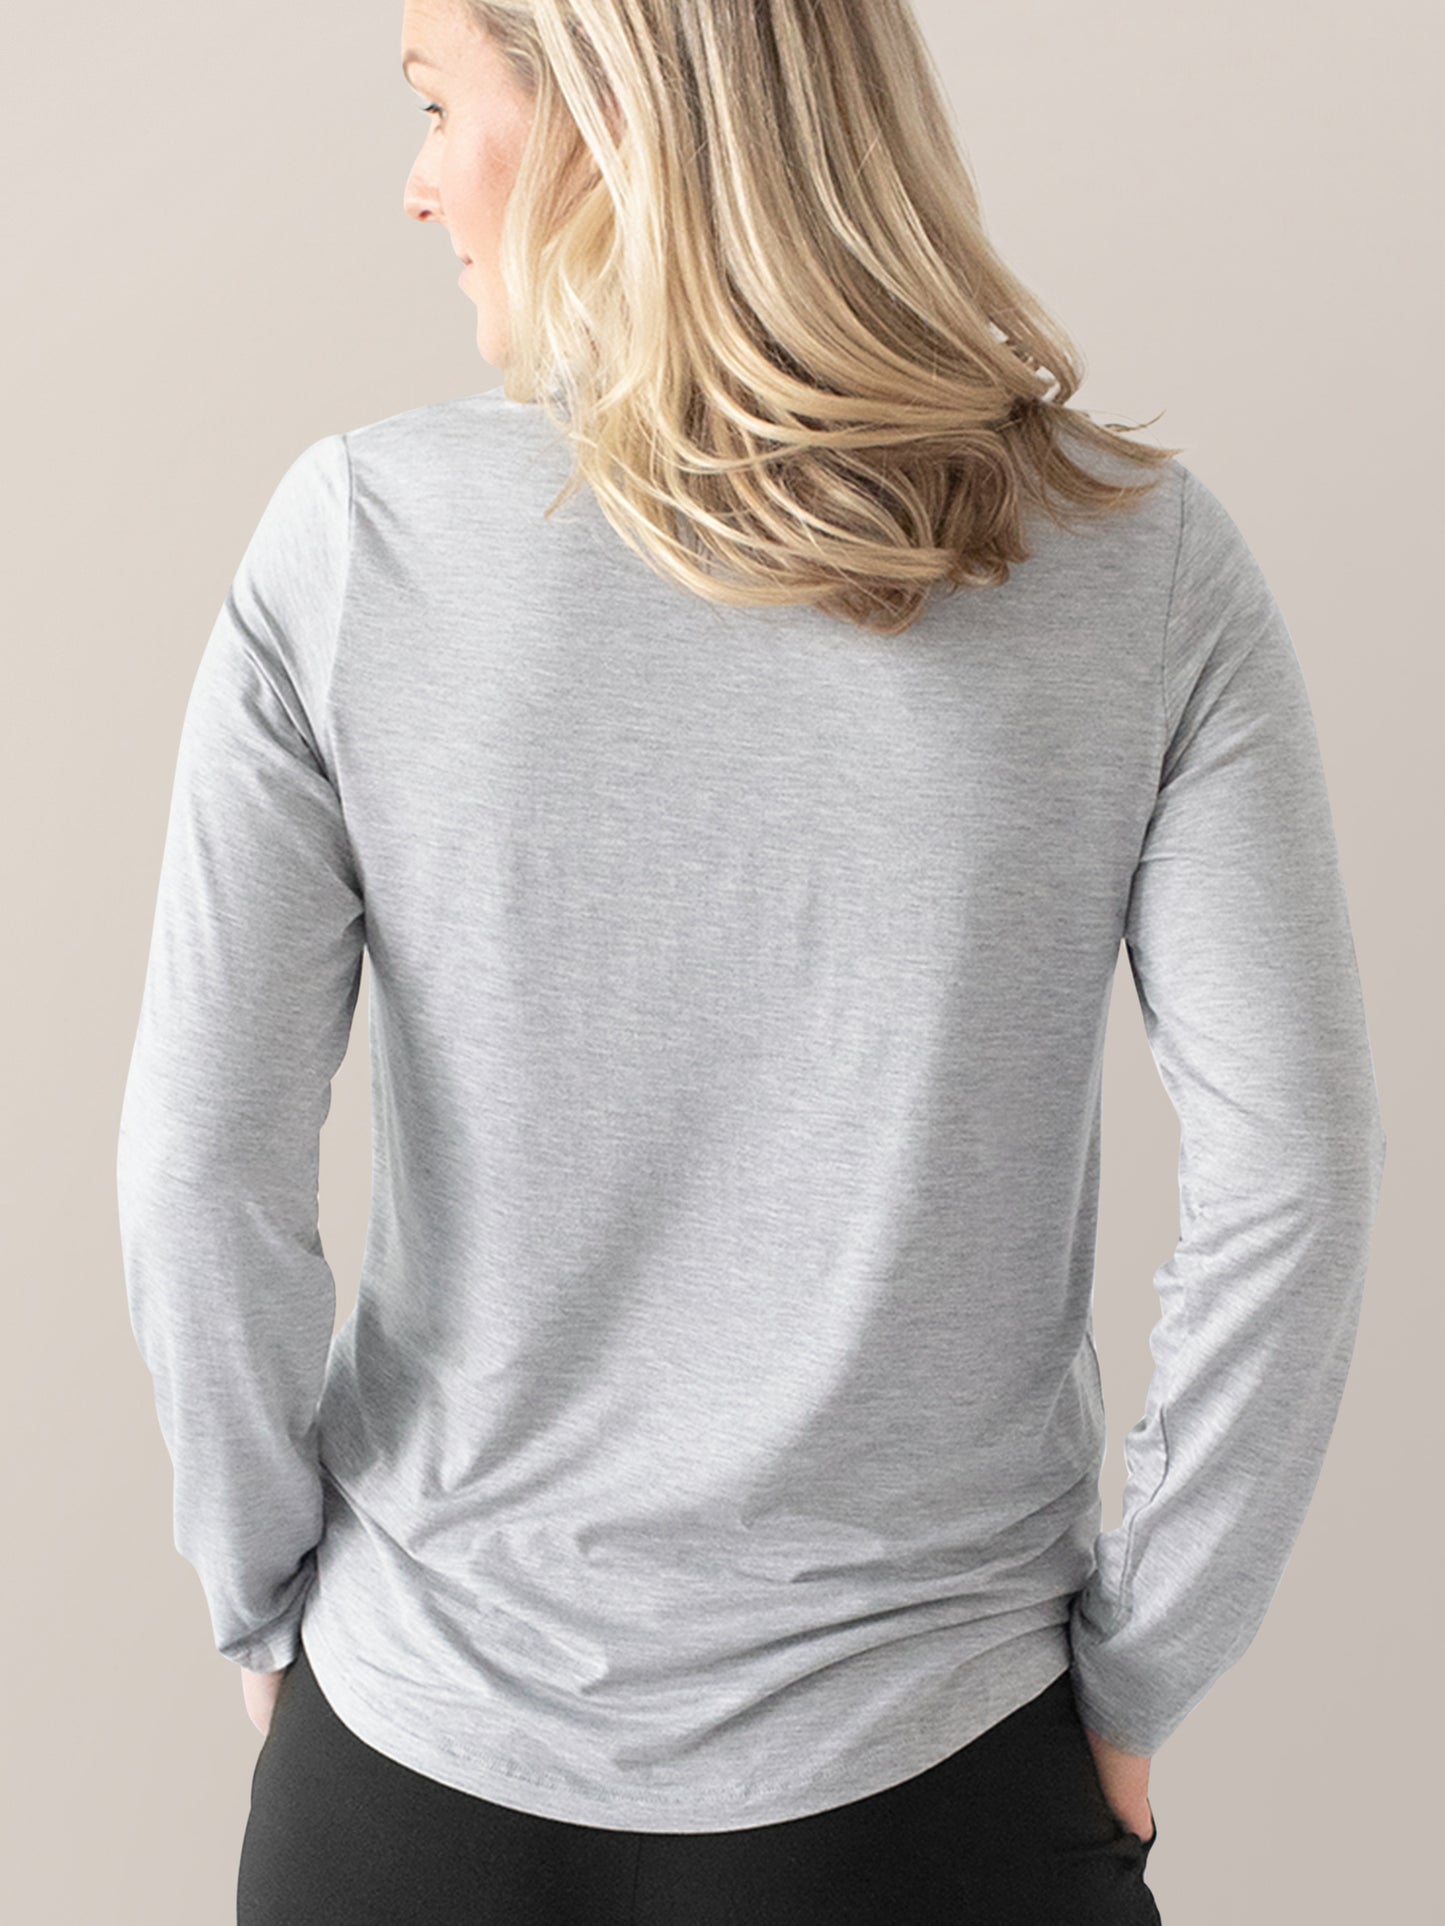 Back of a model wearing the  Bamboo Maternity & Nursing Long Sleeve T-shirt in Grey Heather